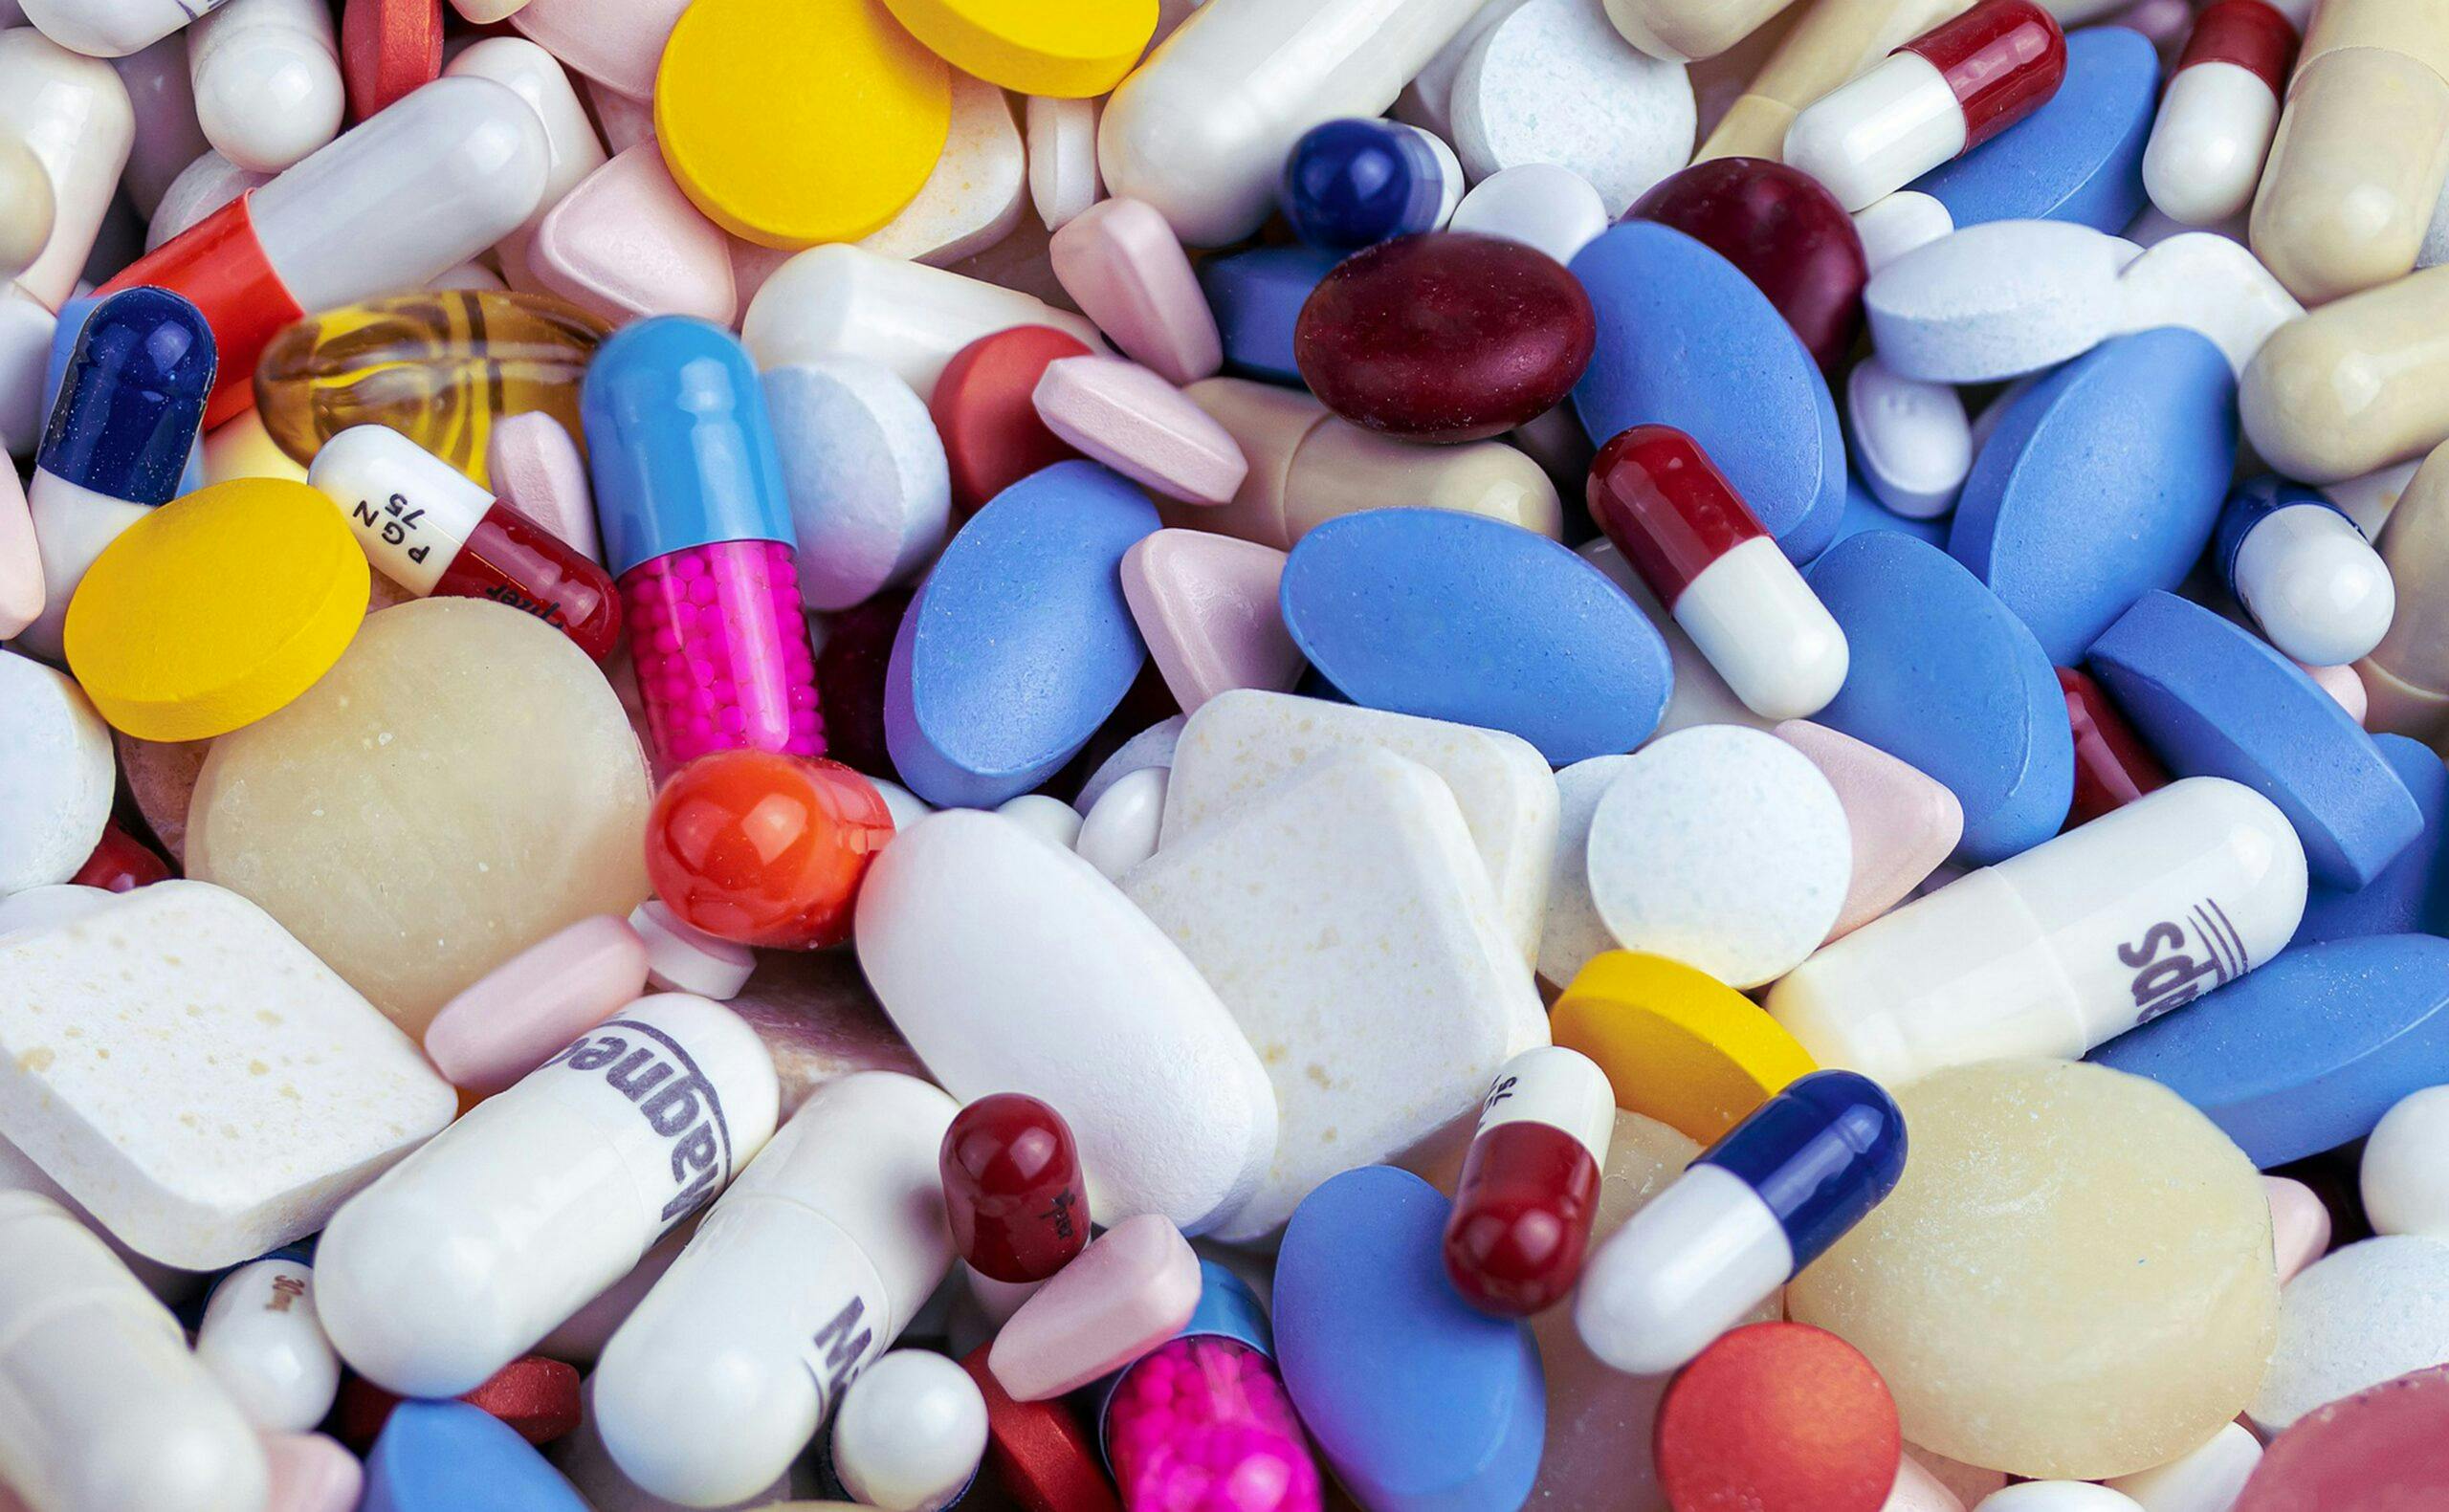 An image of various colourful pills